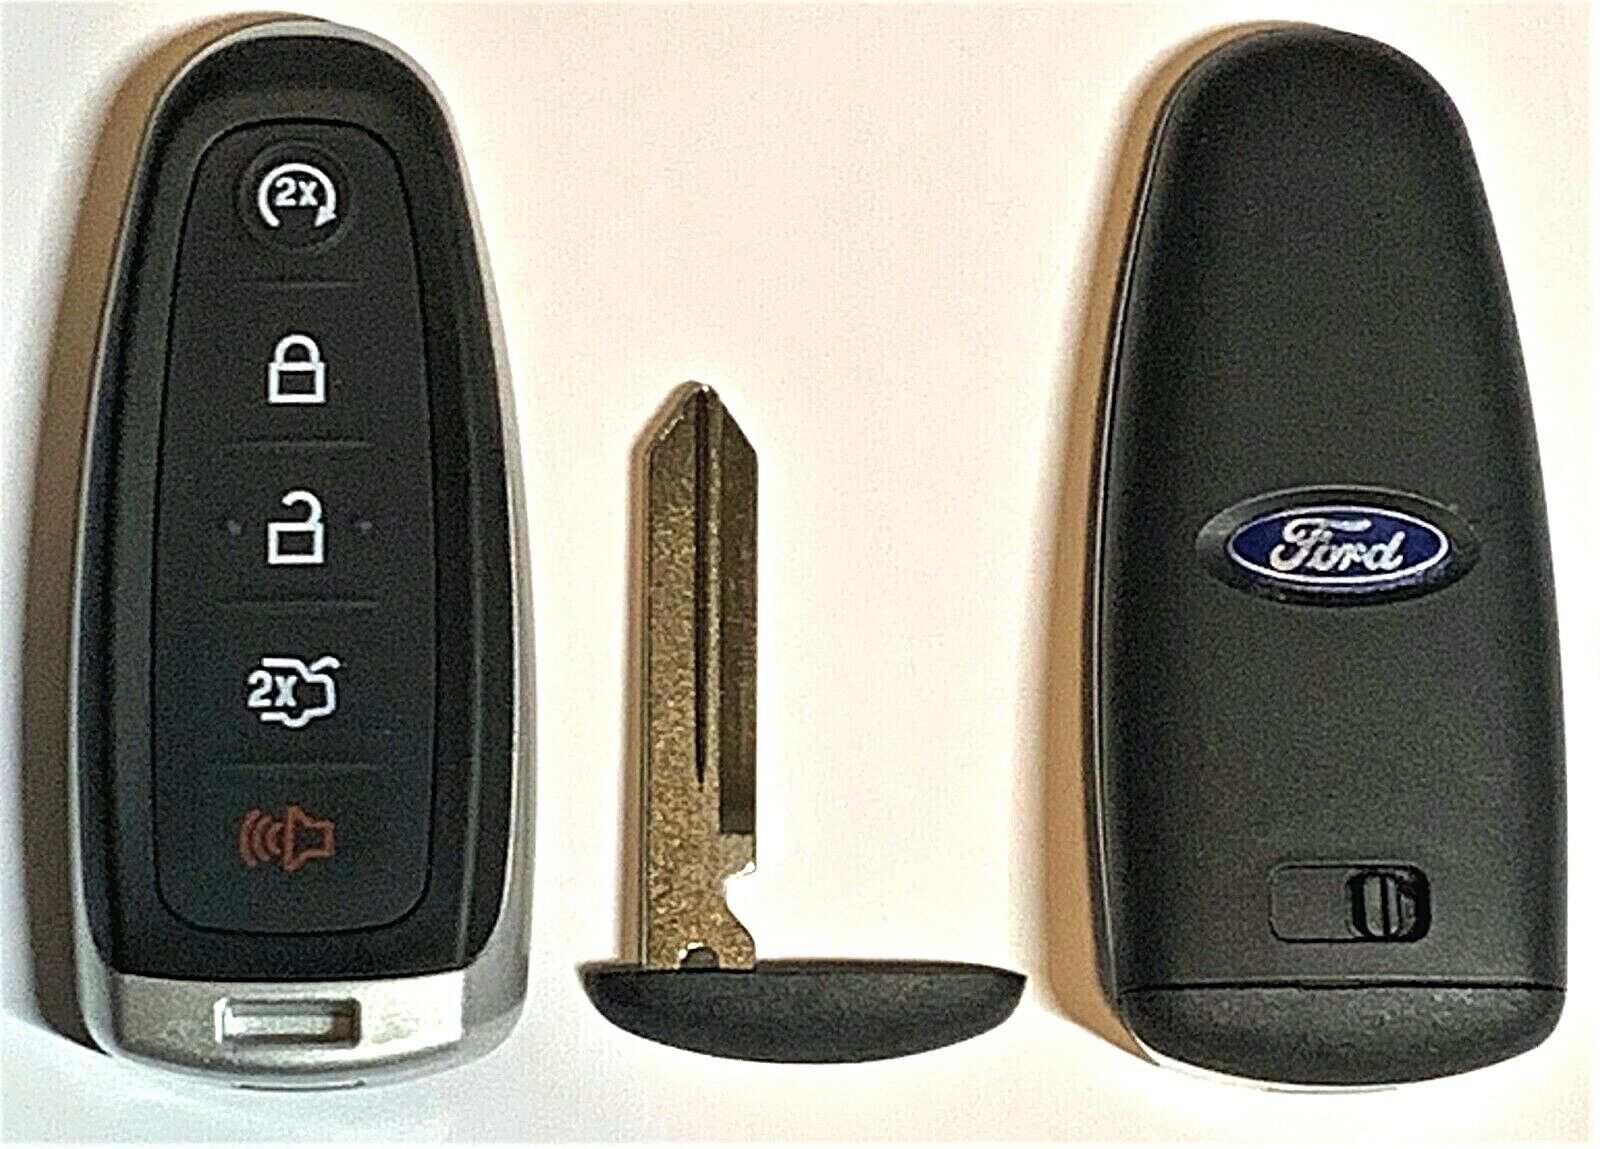 NEW Ford BT4T 5 Button Smart Key Fob M3N5WY8609 2011-2018 Fast Shipping USA A+++